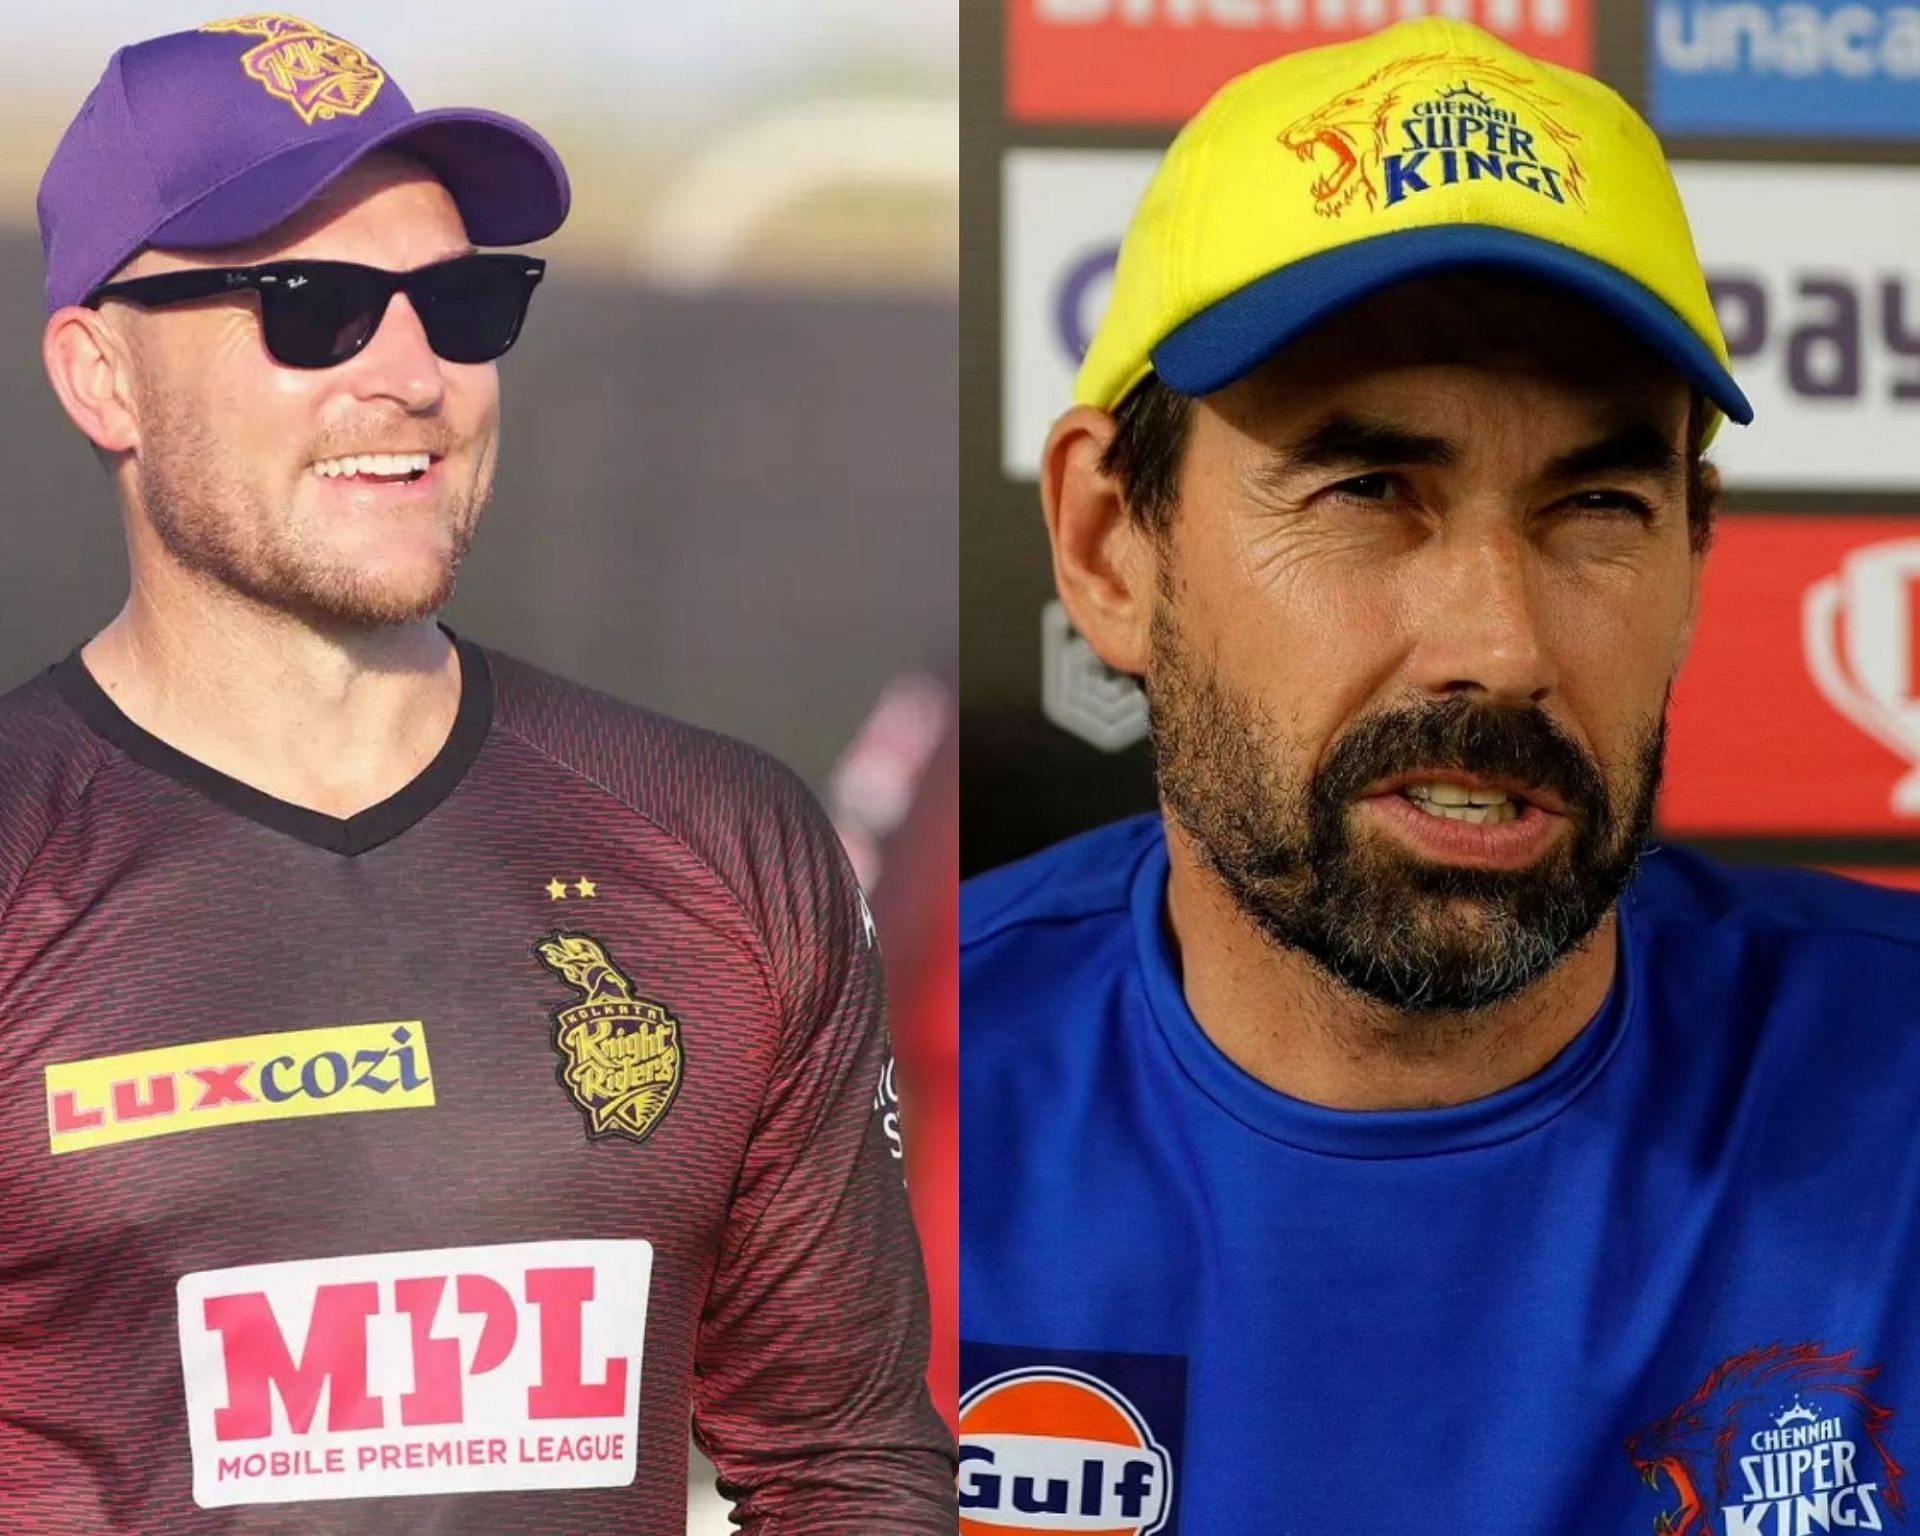 Brendon McCullum (L) and Stephen Fleming will see their franchises meet in the final of the IPL 2021